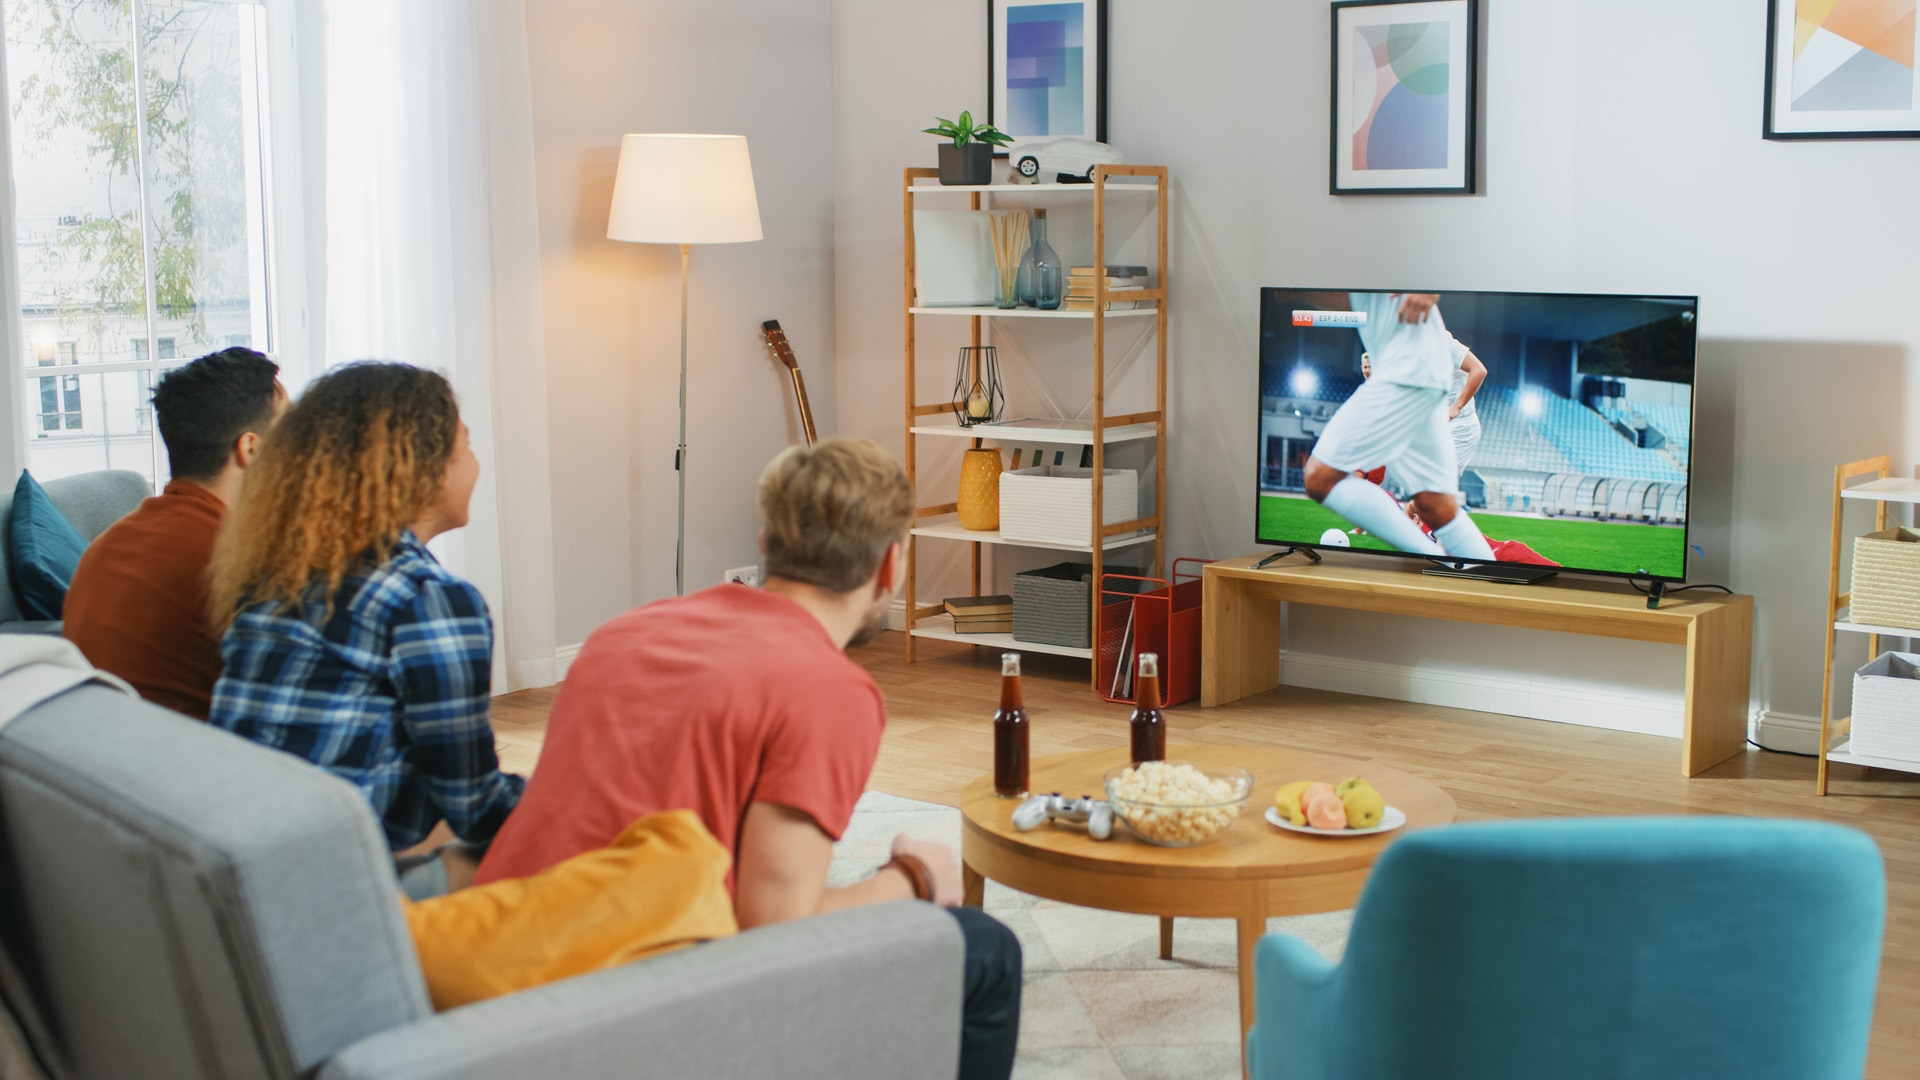 Three Sports Fans Sitting on a Couch in the Living Room Watch Important Soccer Match, Worry and Cheering For their Team. Bright Cozy Apartment with Friends Eating Snacks and Having Fun.